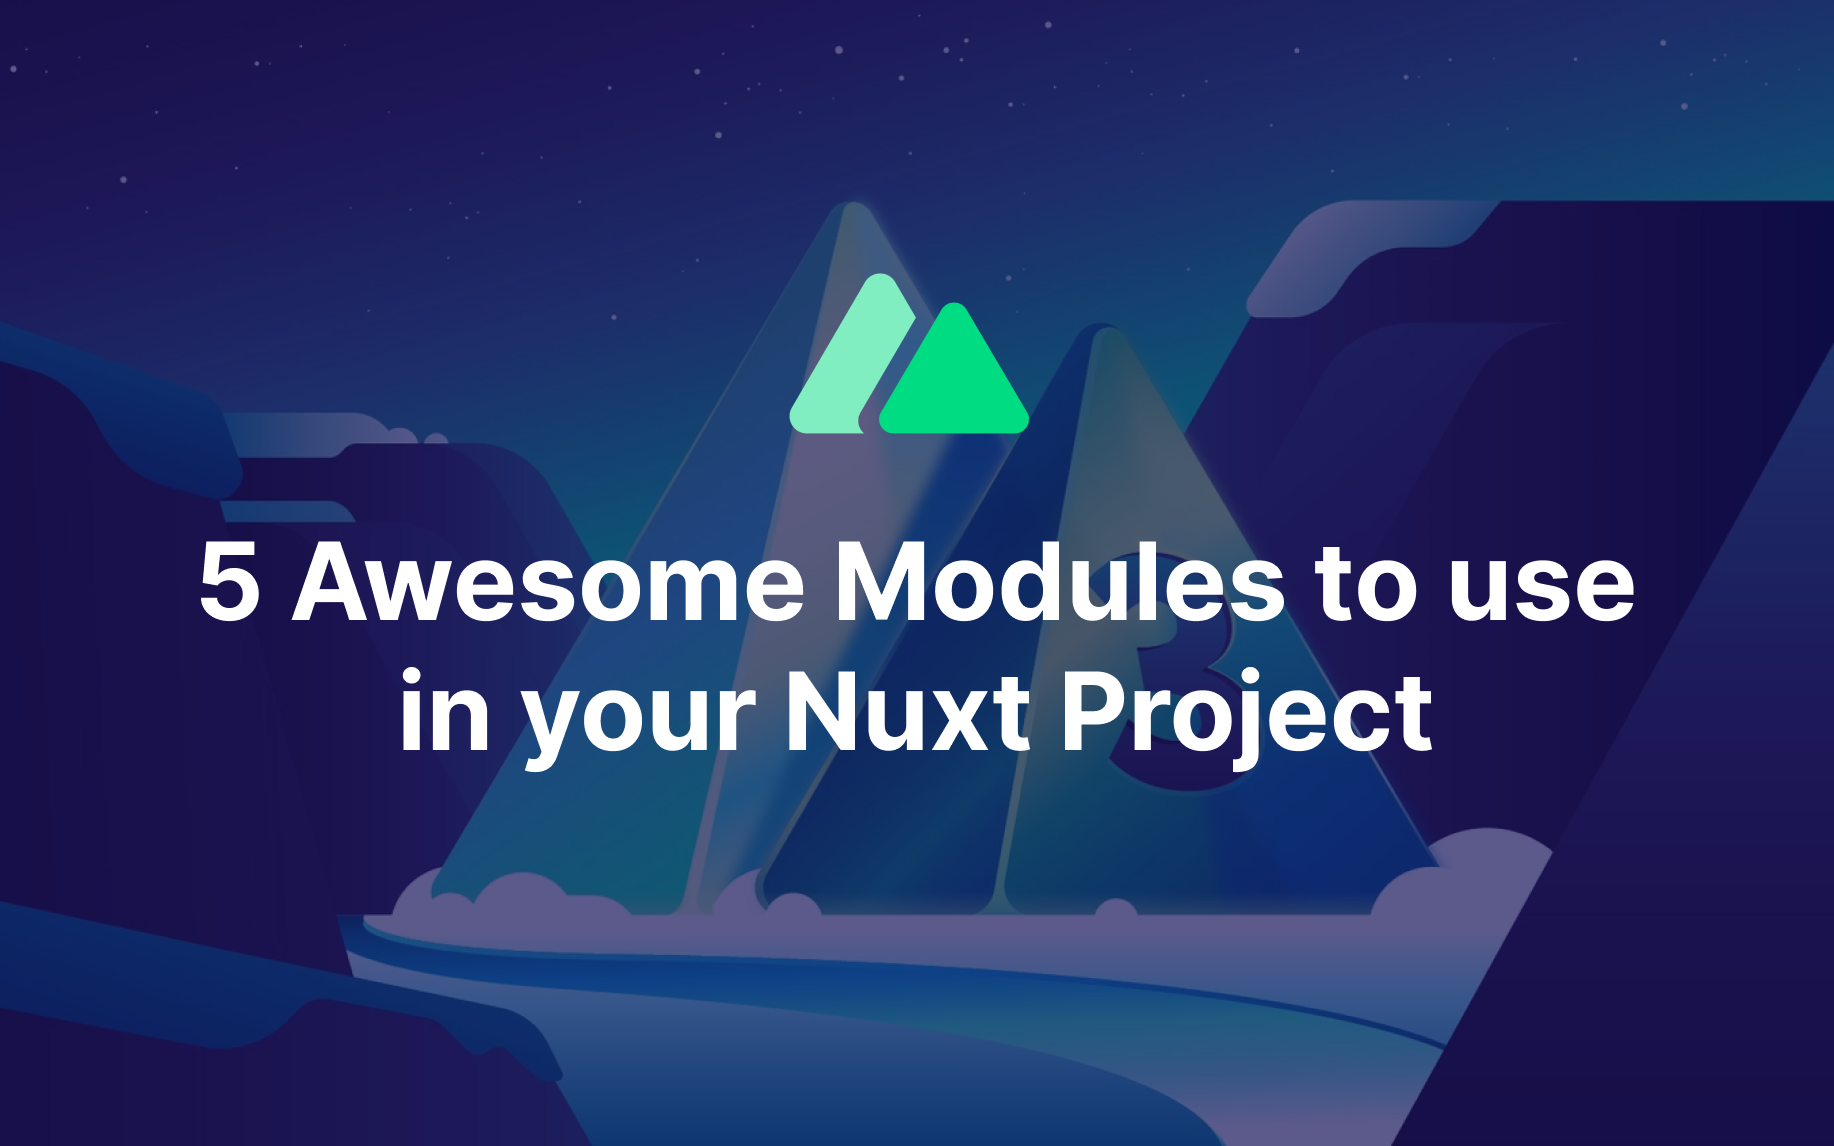 5 Awesome Modules to use in your Nuxt Project - Vue School Articles